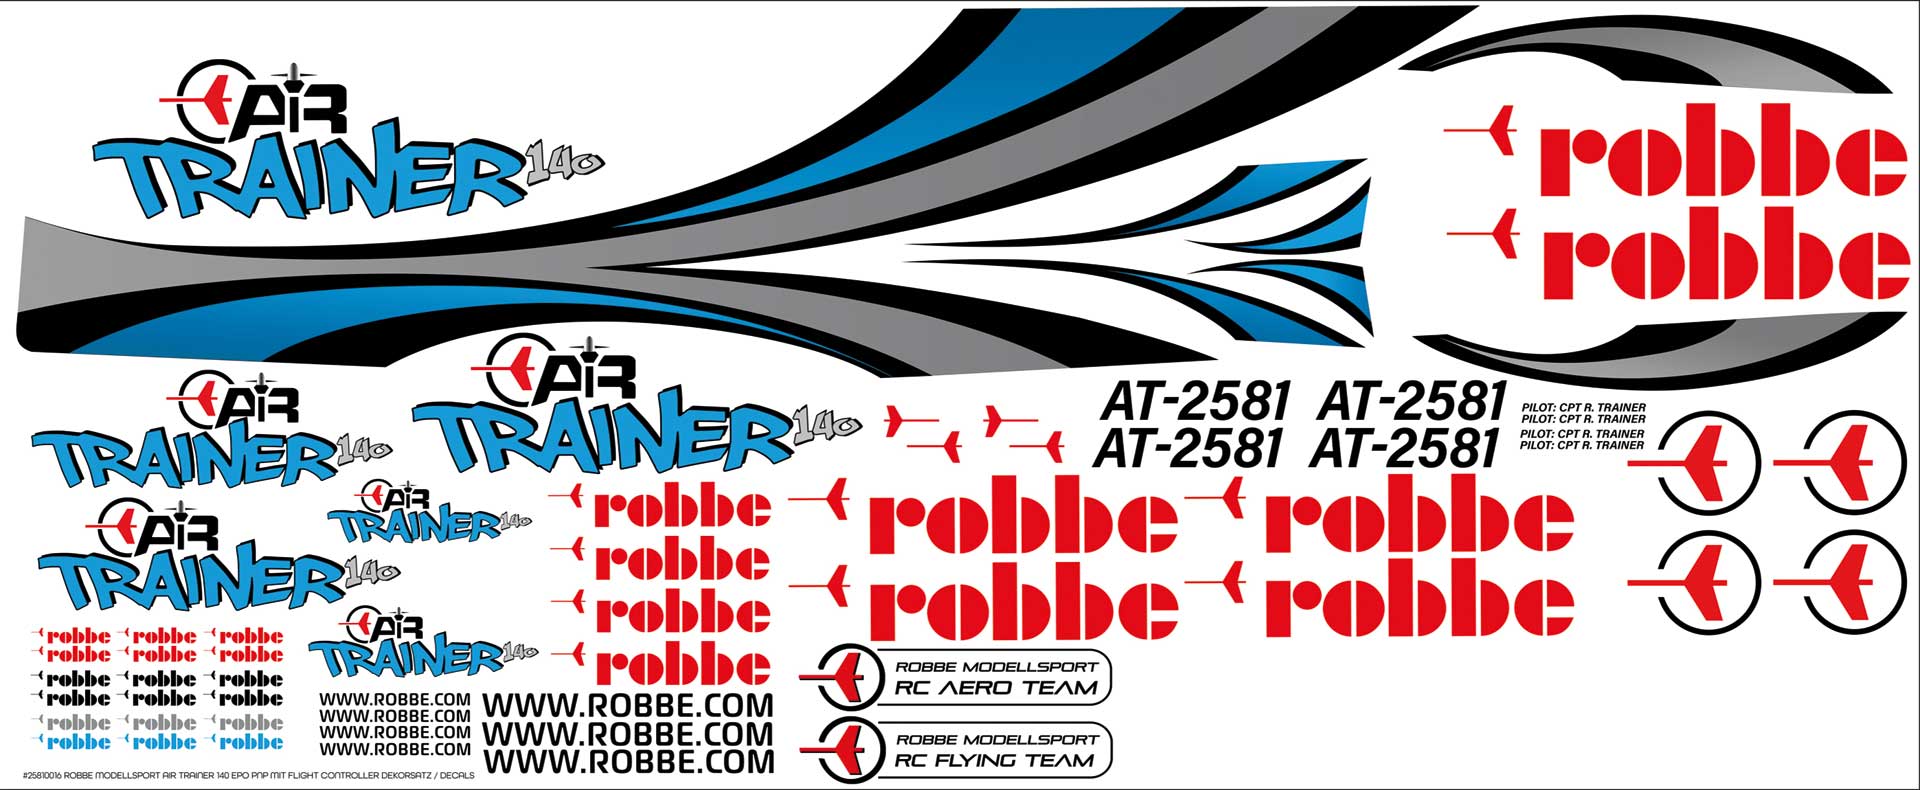 Robbe Modellsport Decal kit Air Trainer 140